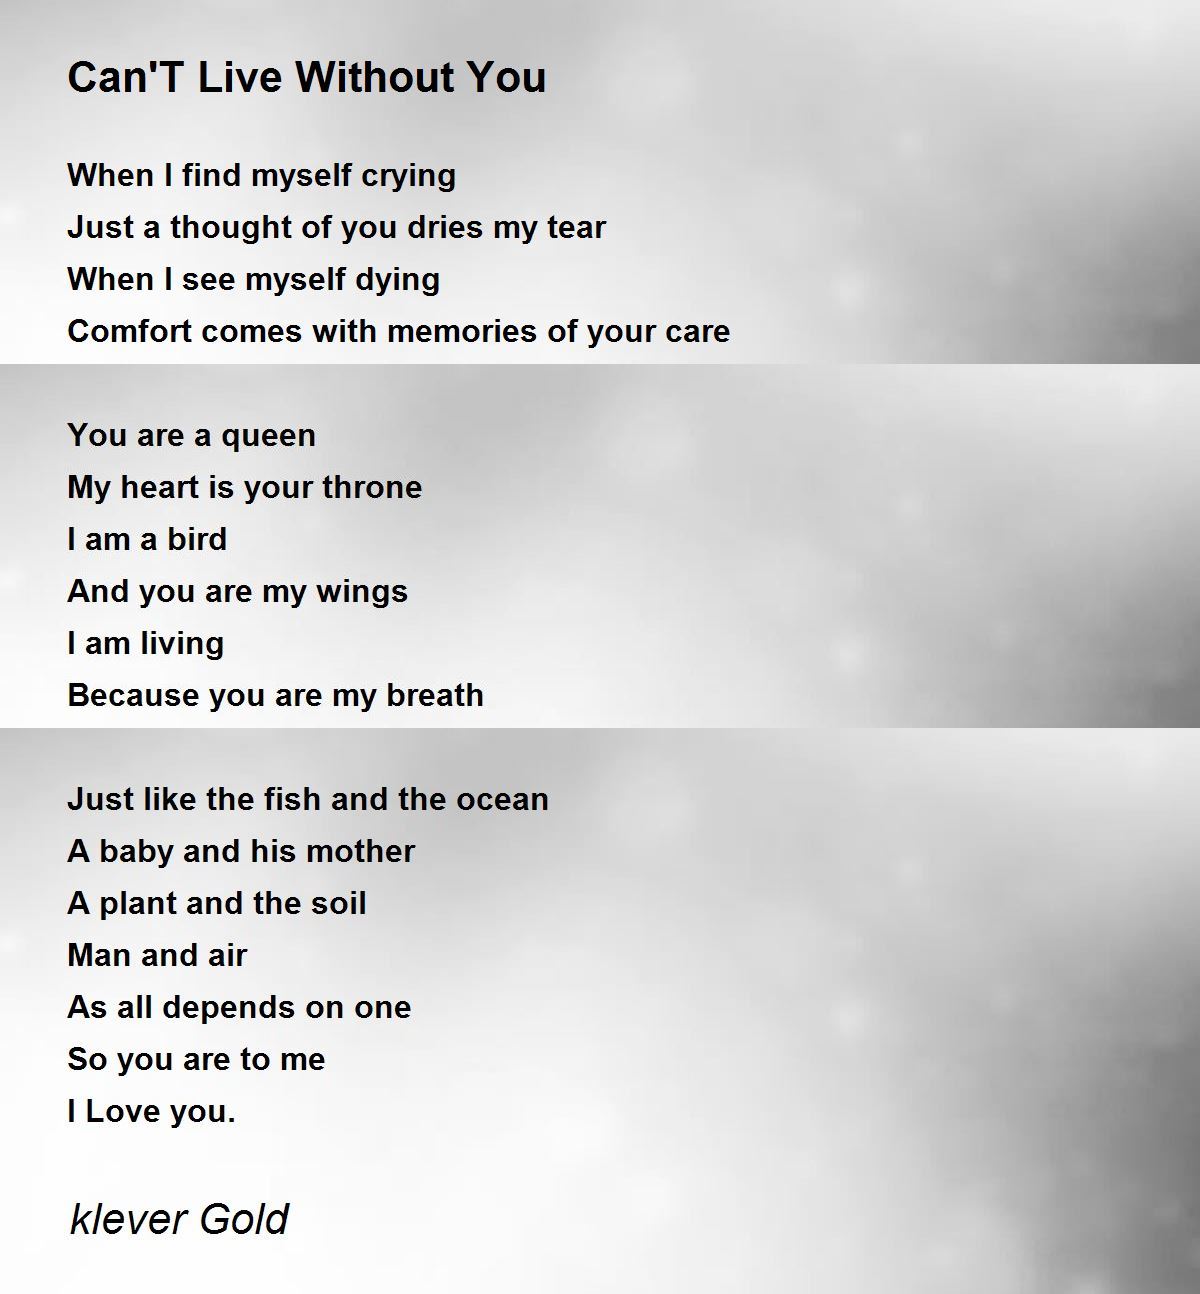 Can'T Live Without You - Can'T Live Without You Poem by klever Gold